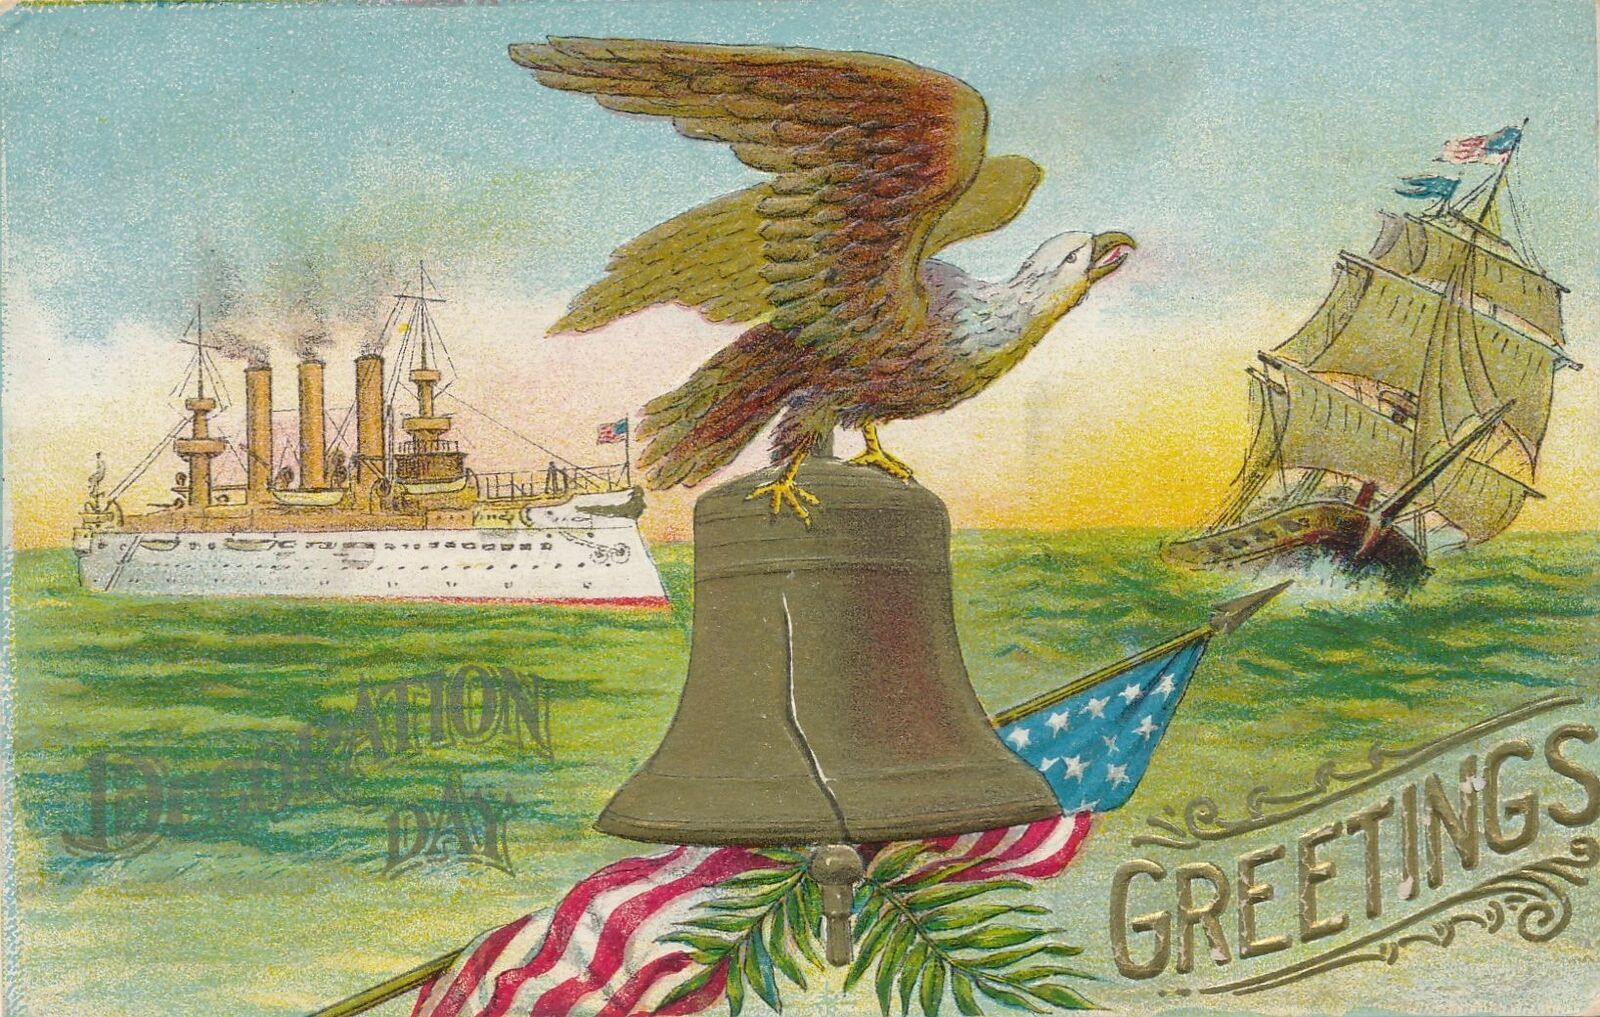 DECORATION DAY - Eagle, Bell and Flag Decoration Day Greetings - 1909